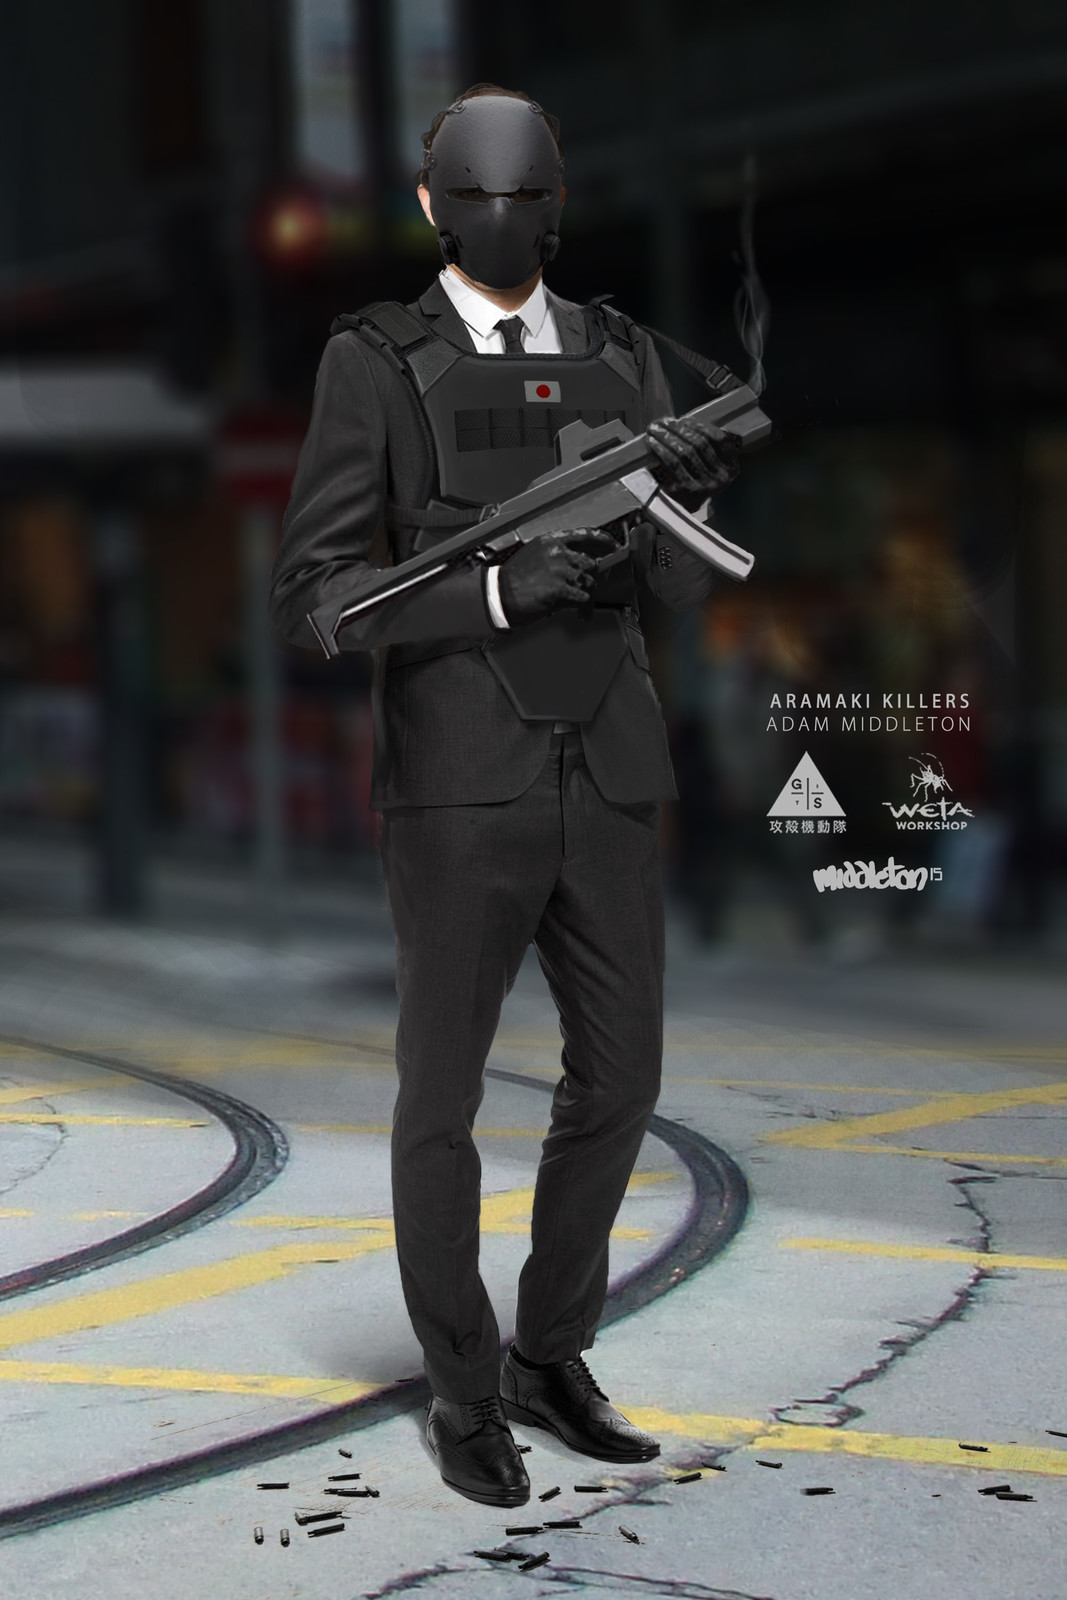 Section 6 Security/Assassin